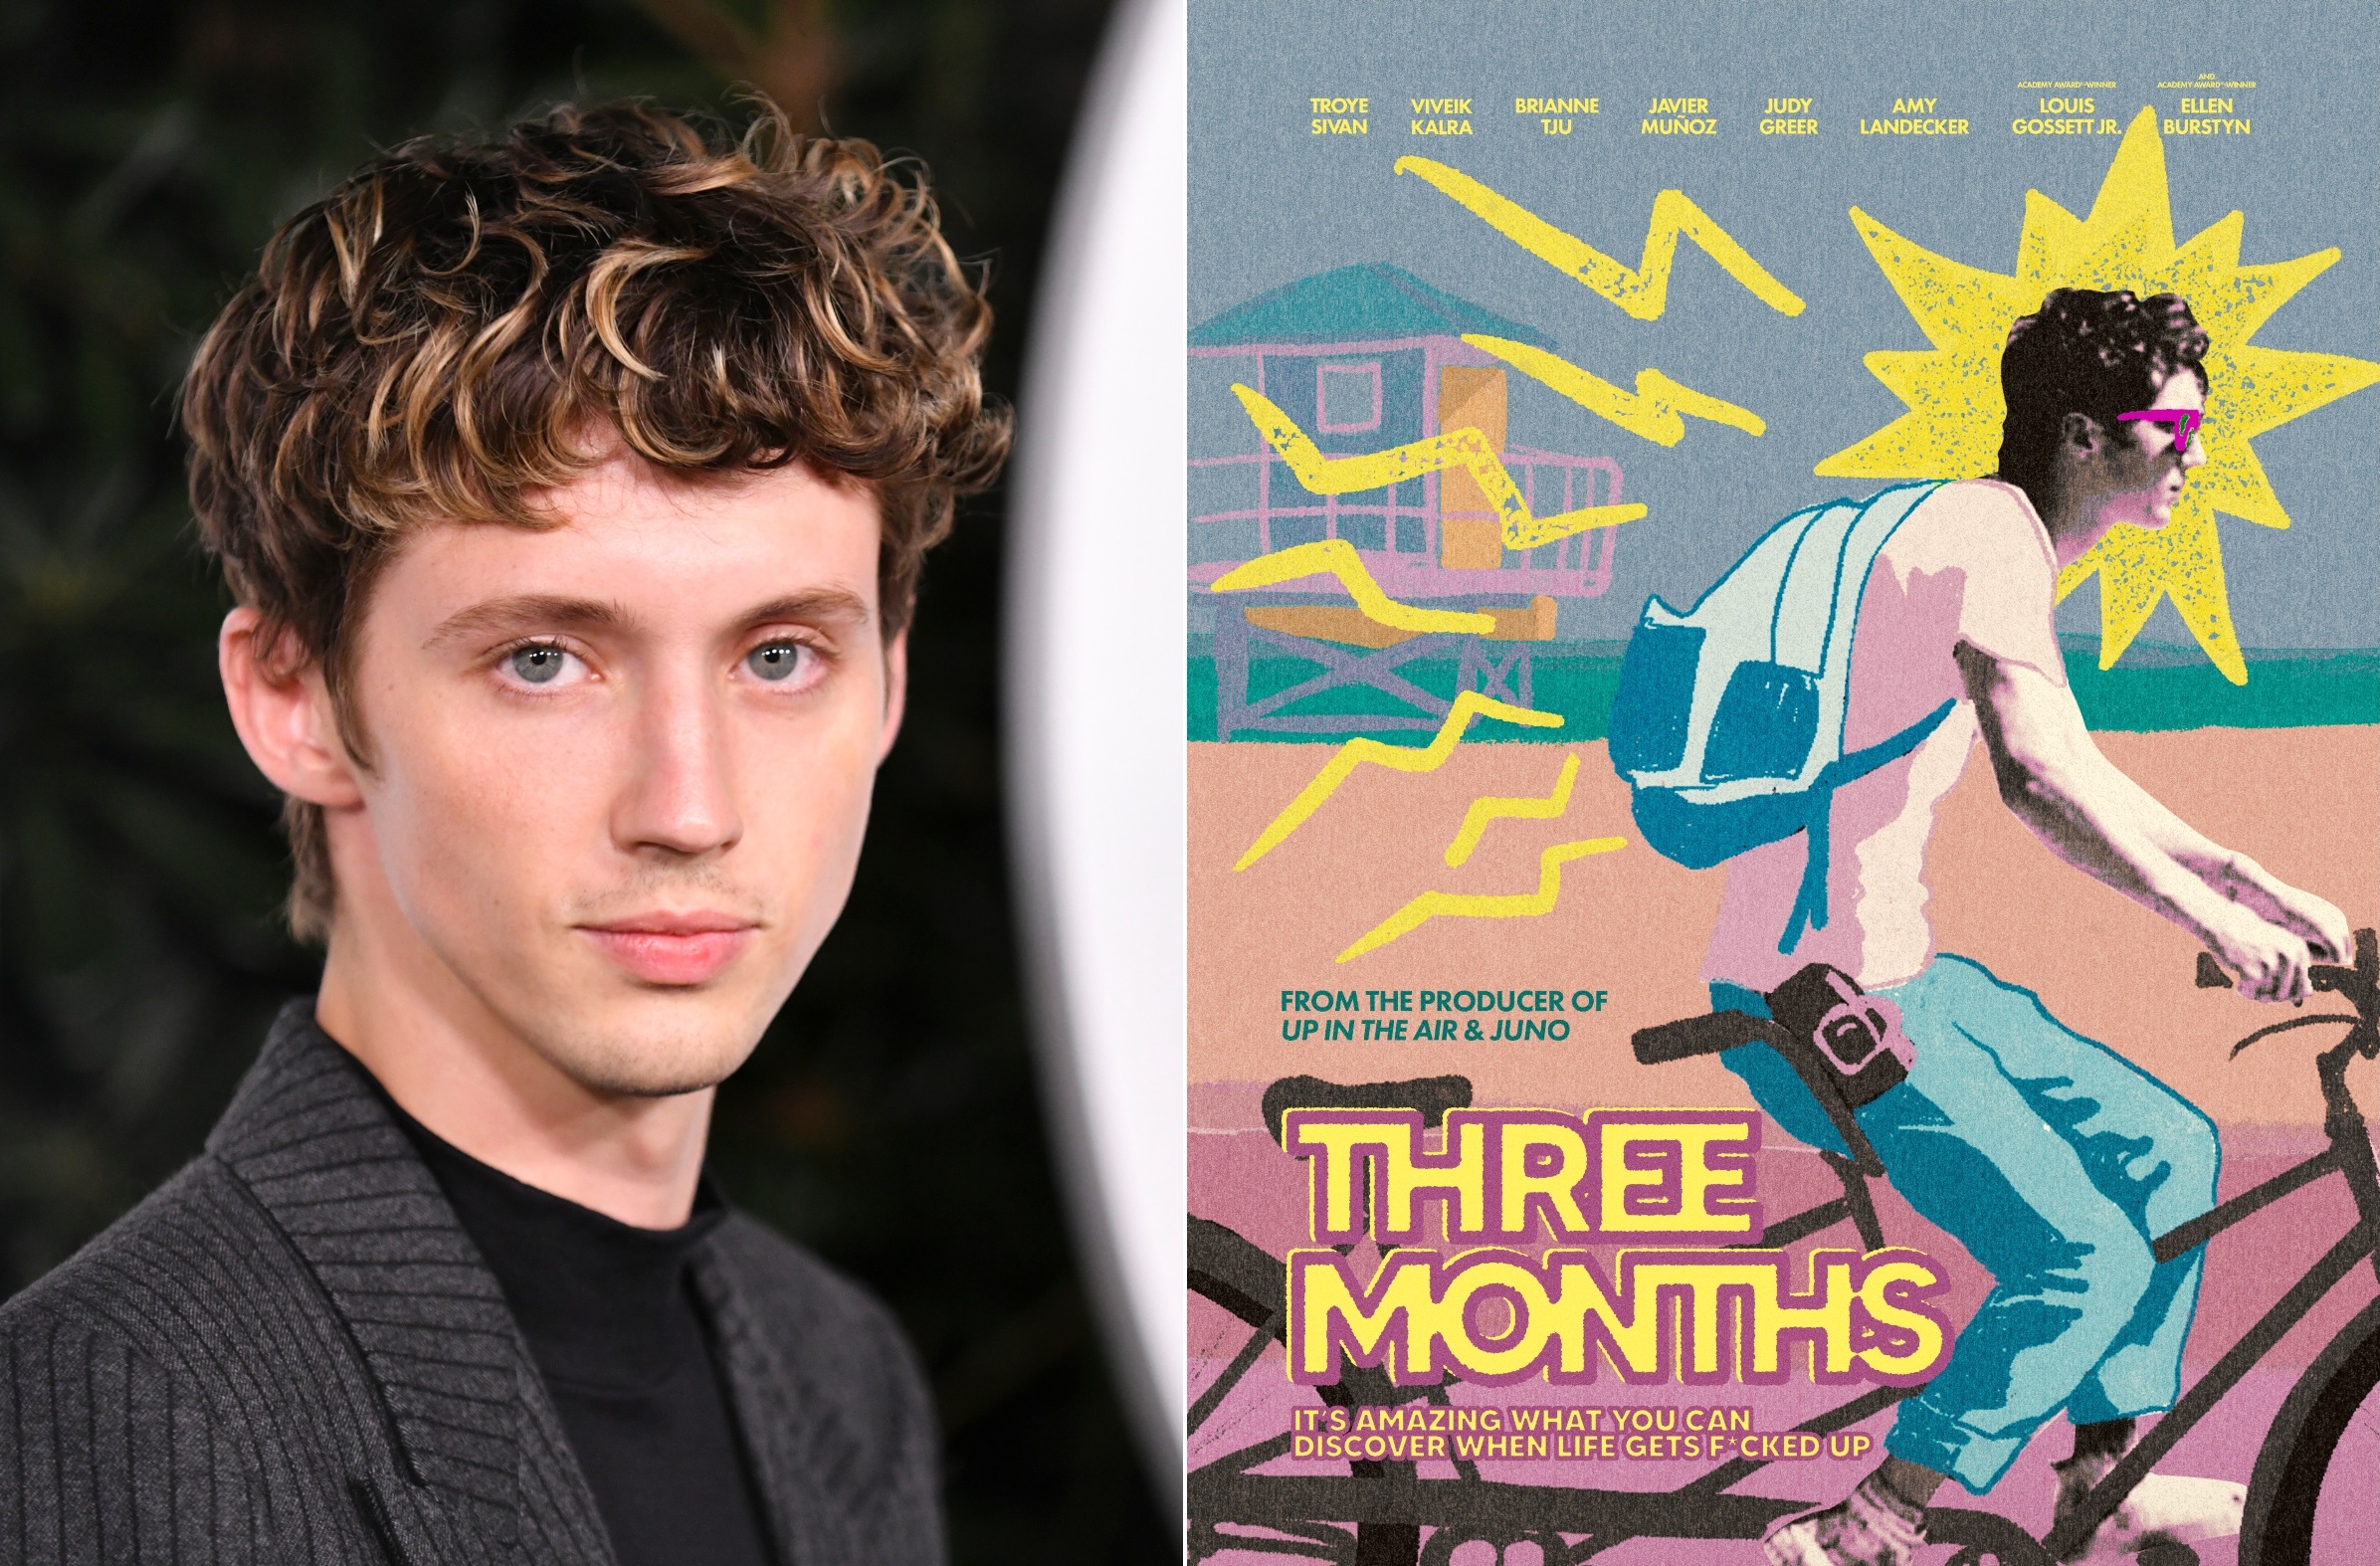 Months earlier. Sivan Troye "in a Dream". Lou 7 months movie.